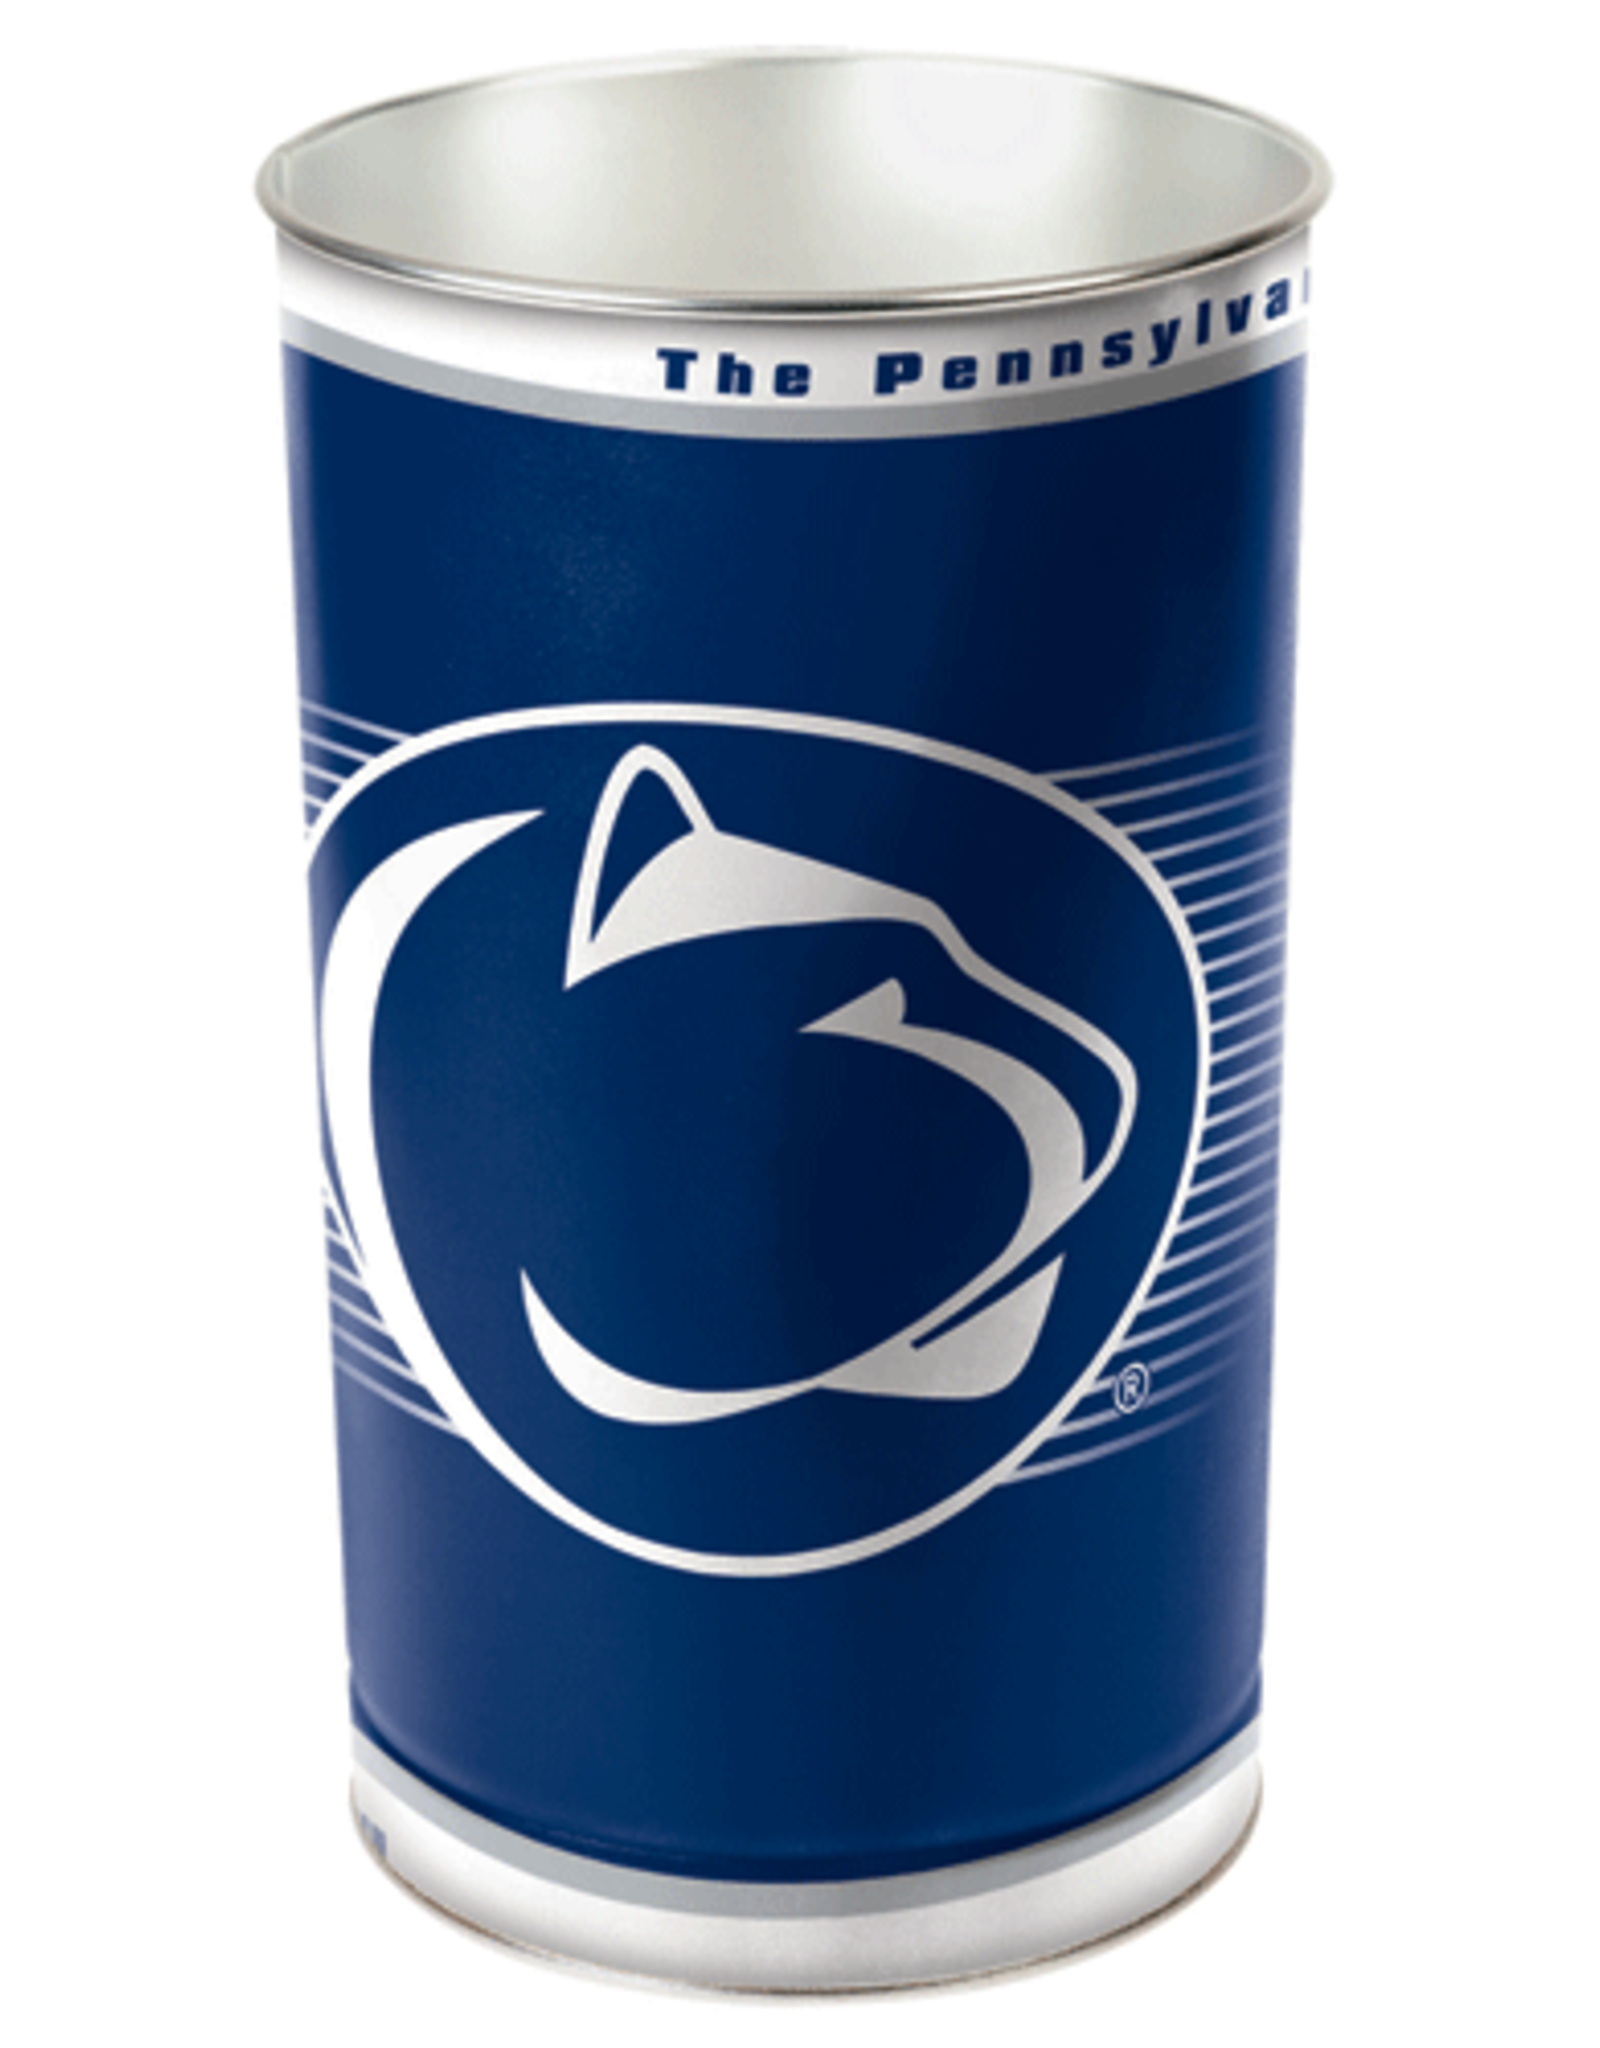 WINCRAFT Penn State Nittany Lions Wastebasket